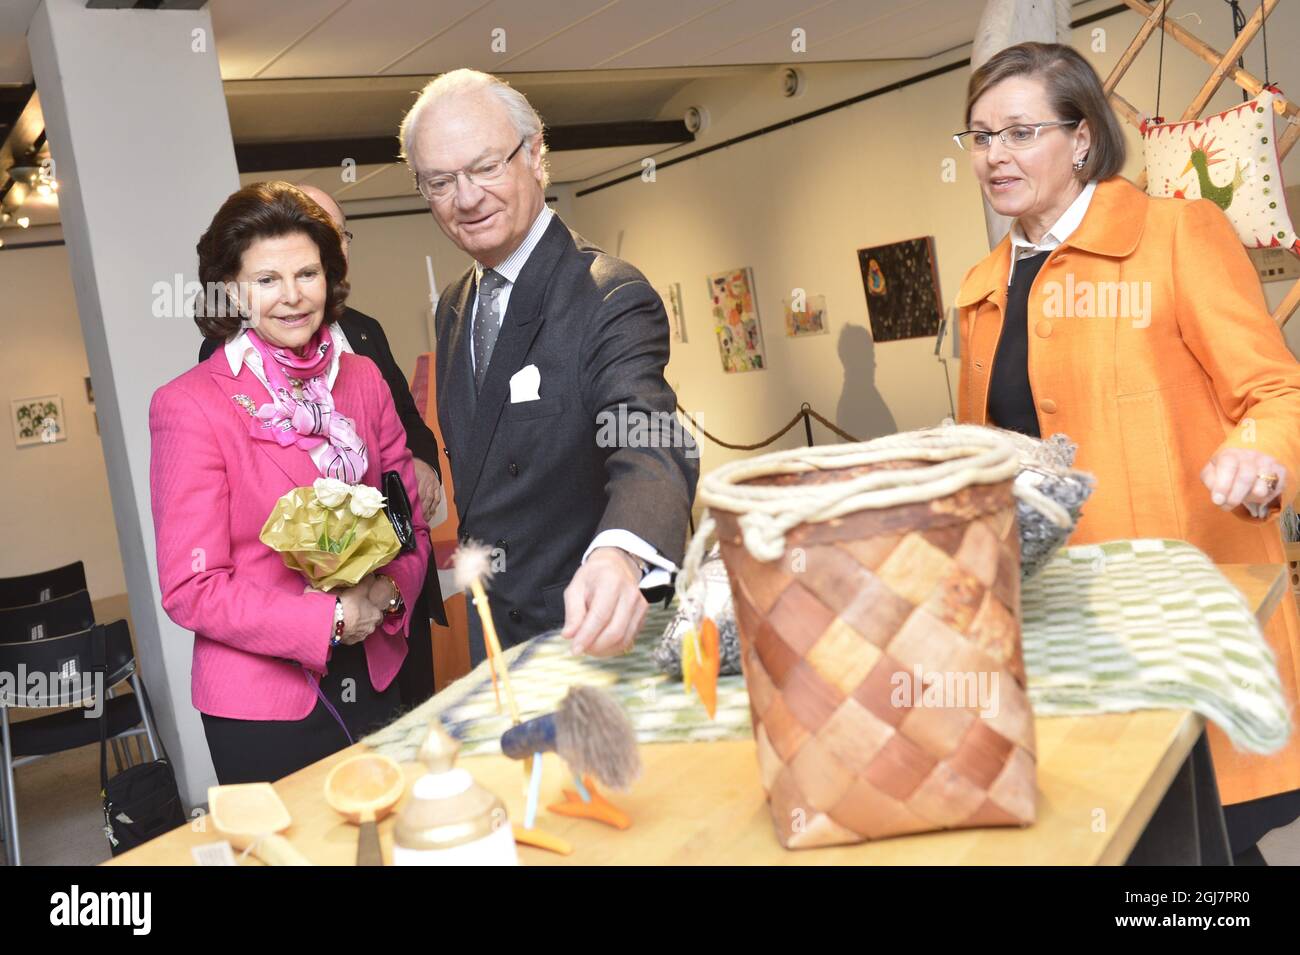 NYBRO 2013-03-06 Queen Silva and King Carl Gustaf of Sweden are guided by consultant Agneta Gefors during a handicraft exhibition in Nybro, Sweden March 6, 2013. The Royal couple is visiting the city in connection of the MonarchÂ´s 40th anniversary on the throne. Foto: Jonas EkstrÃ¶mer / SCANPIX / Kod 10030 Stock Photo